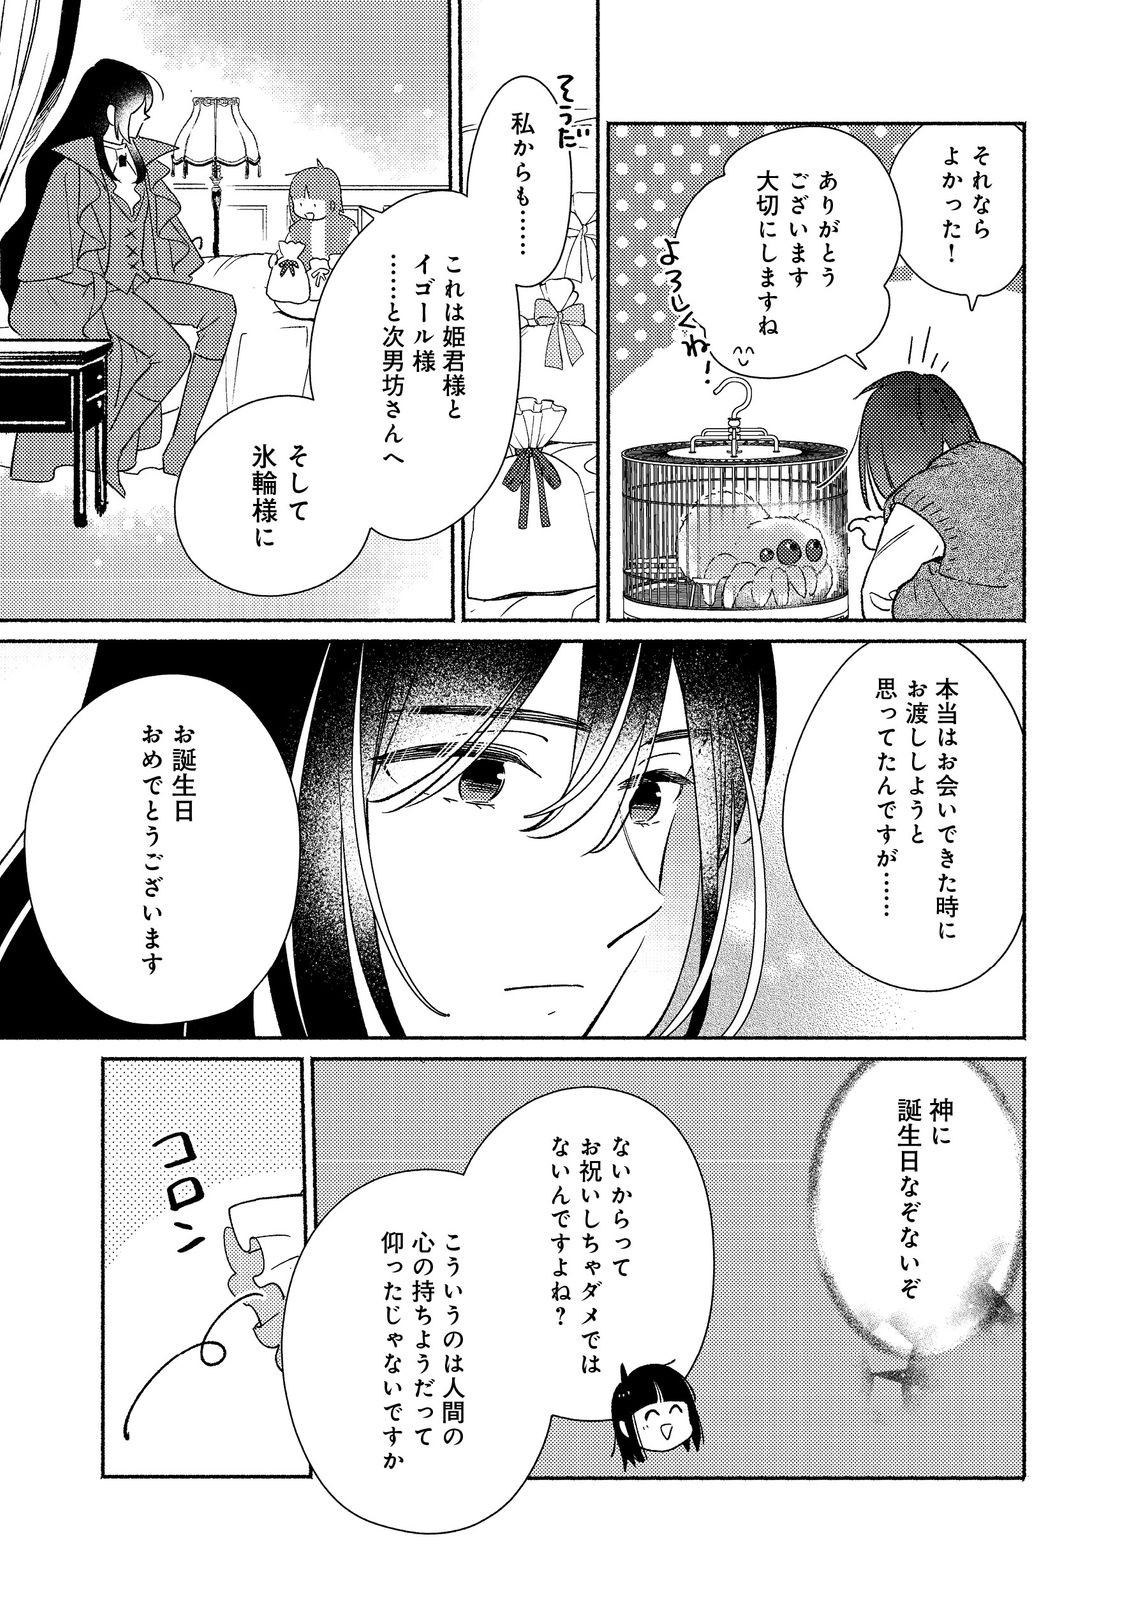 I’m the White Pig Nobleman 第26.2話 - Page 18